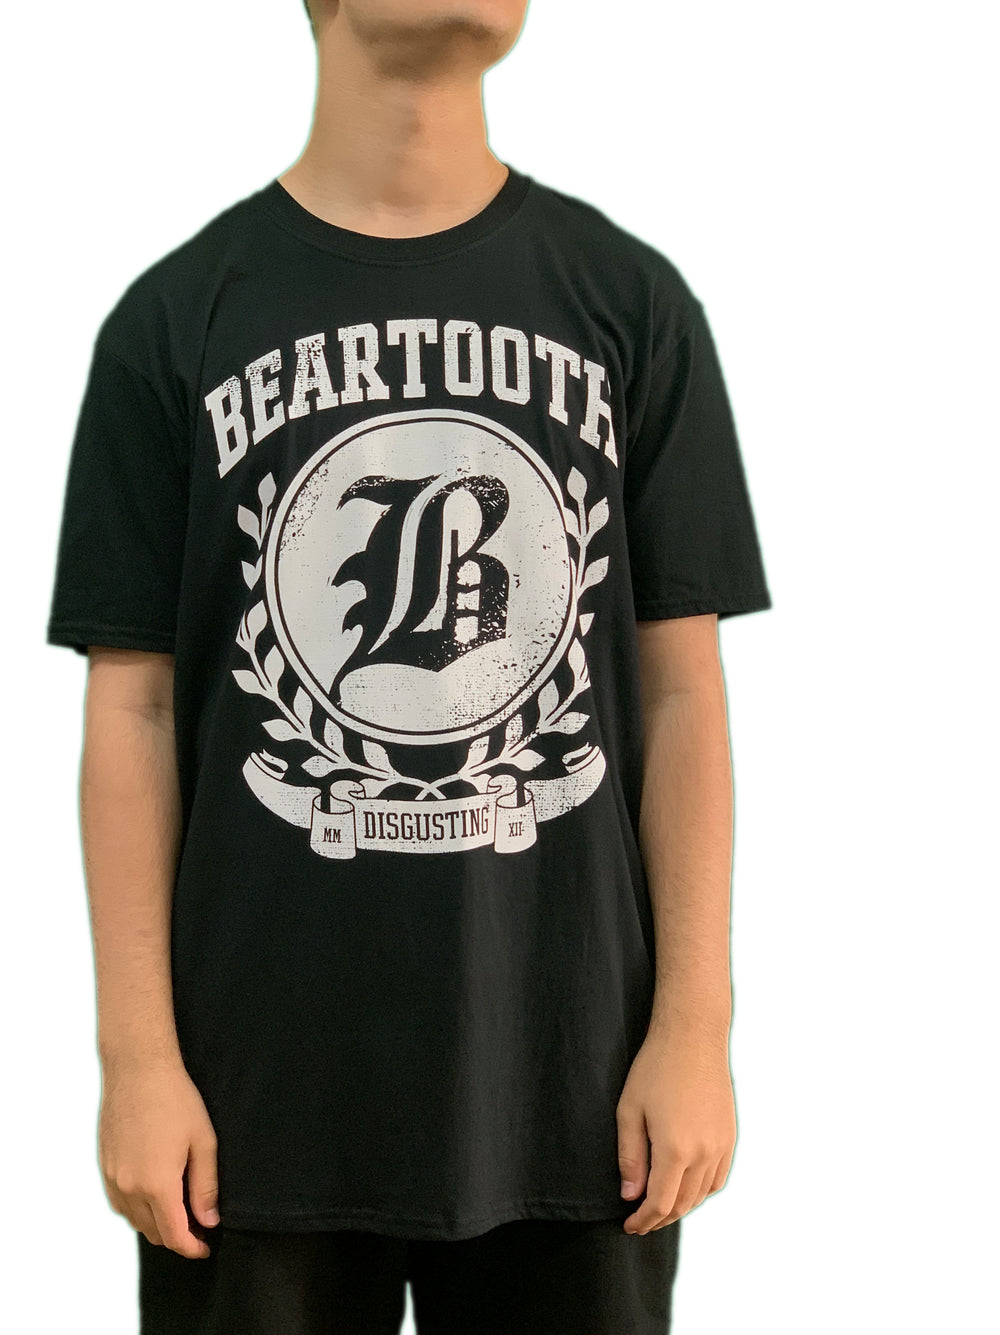 Beartooth Disgusting Unisex Official Tee Shirt Brand New Various Sizes Black